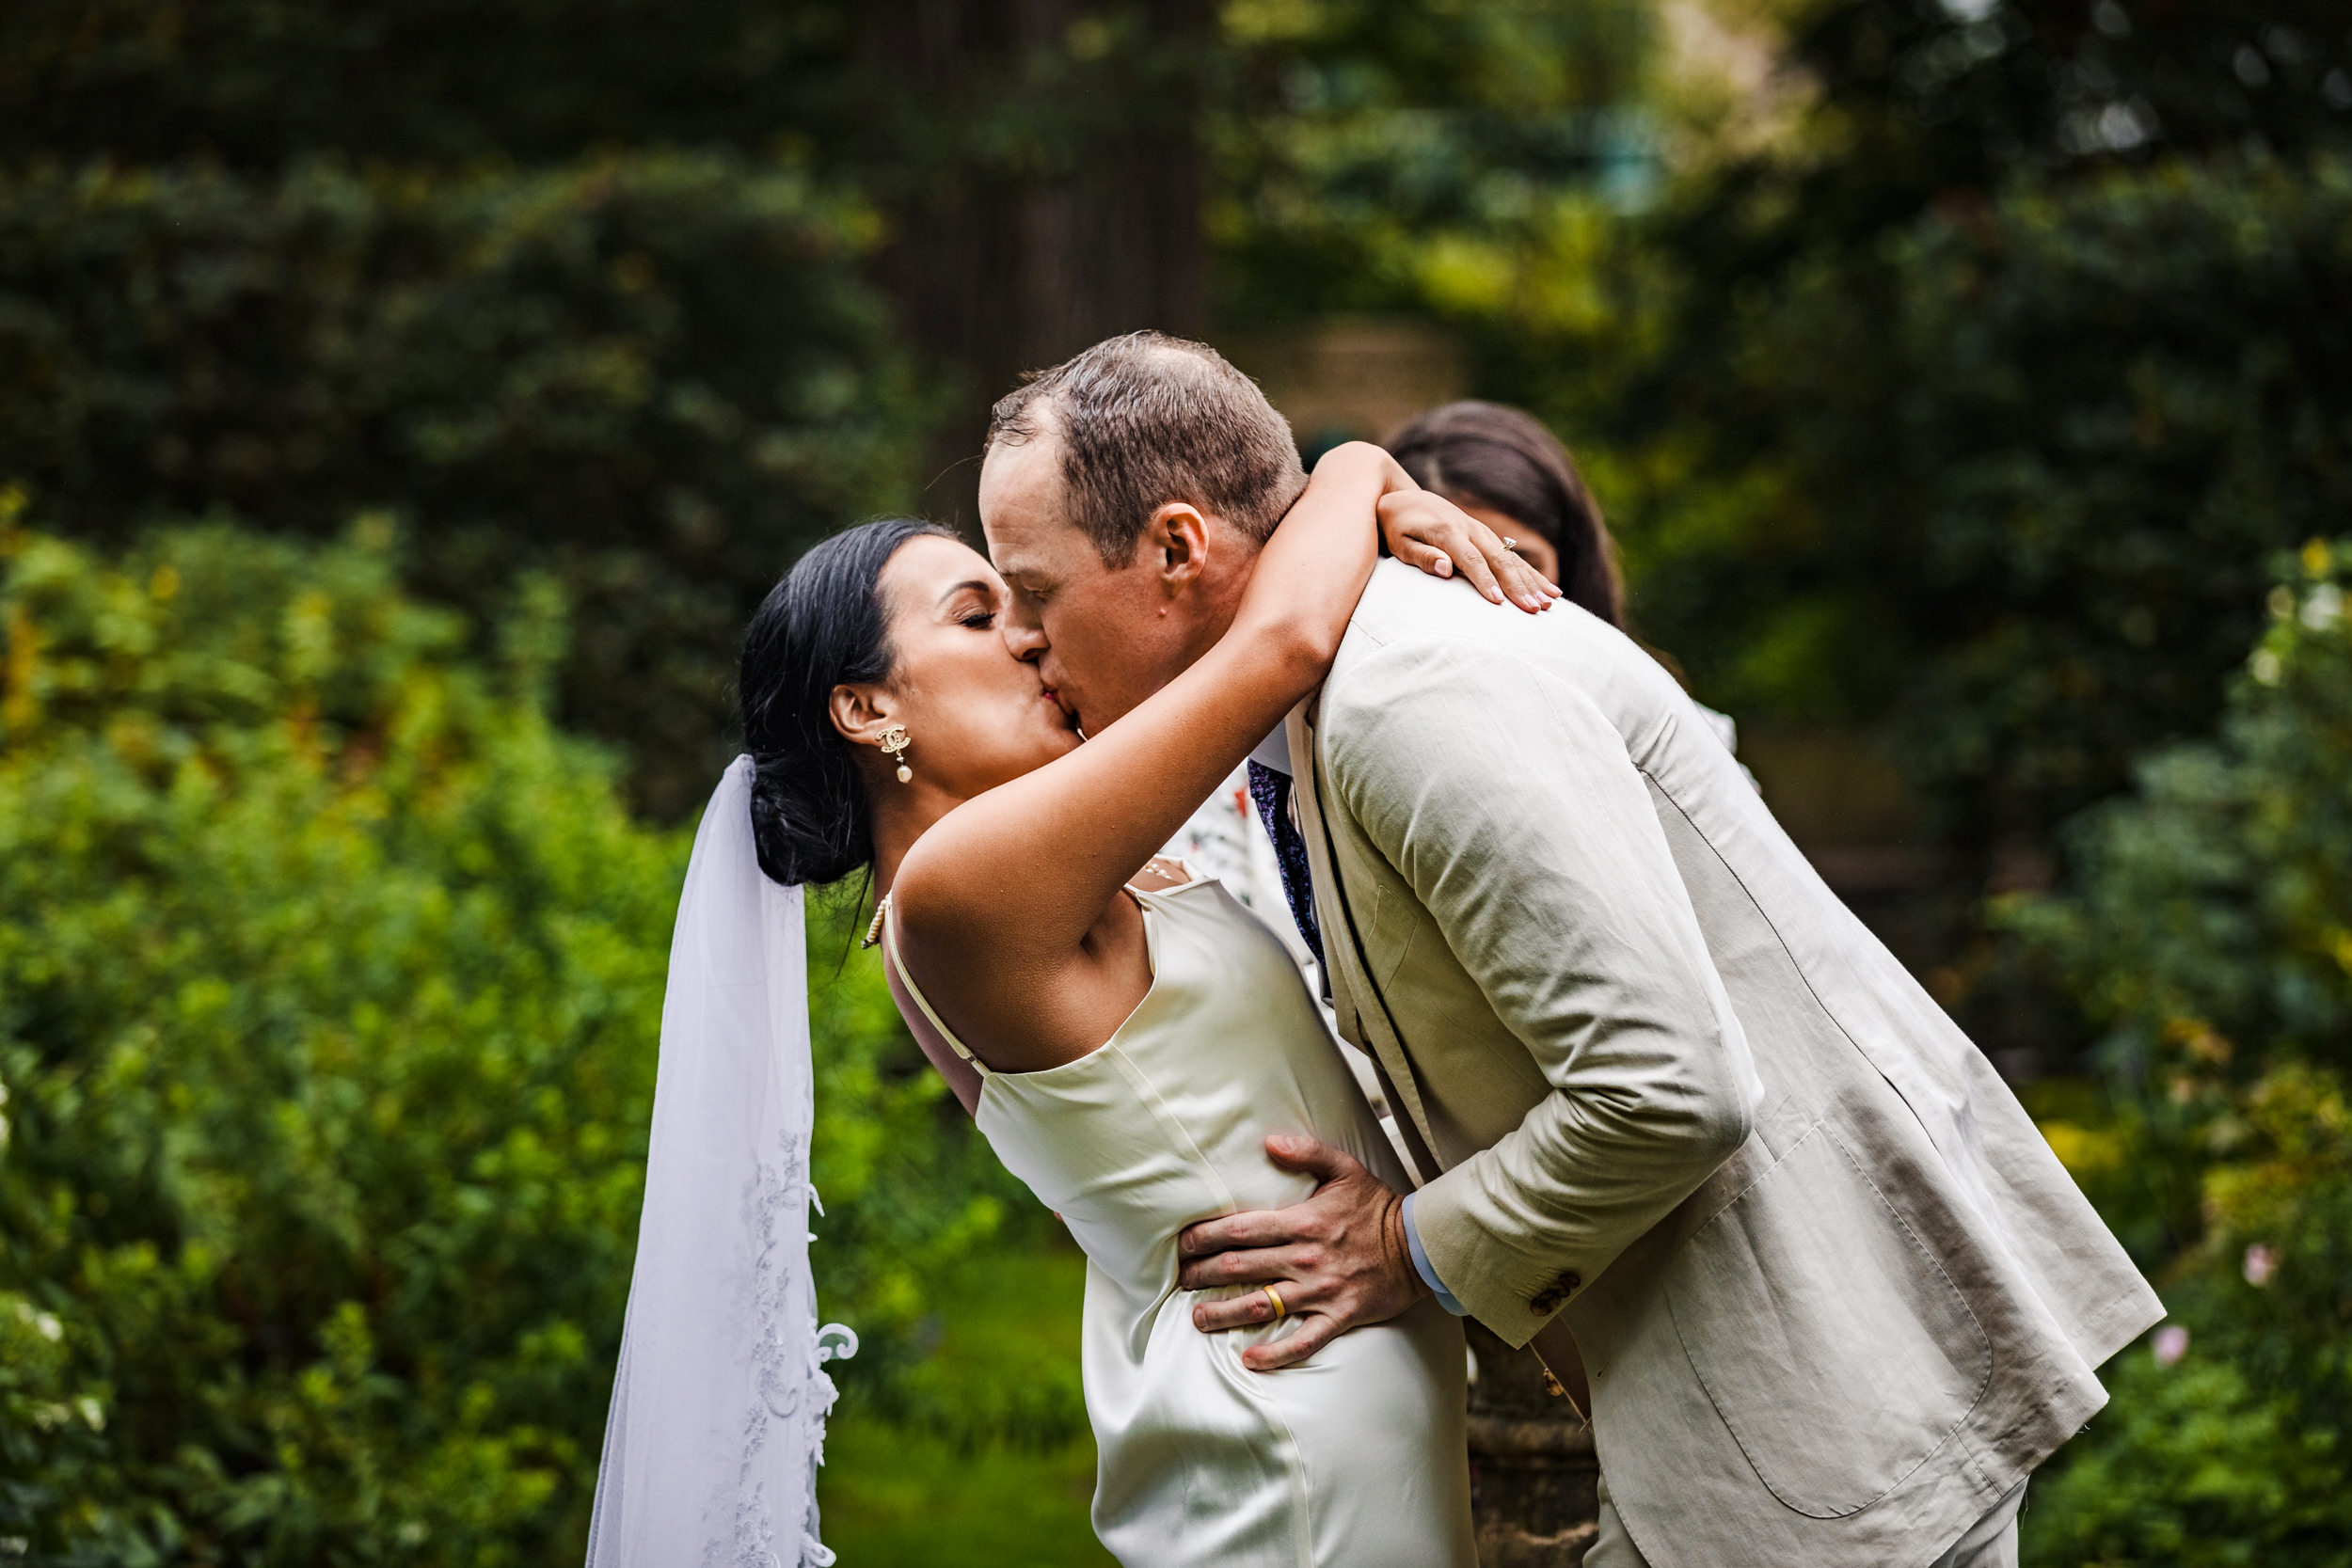 A couple shares their first kiss together during a Shakespeare Garden micro wedding in Evanston.